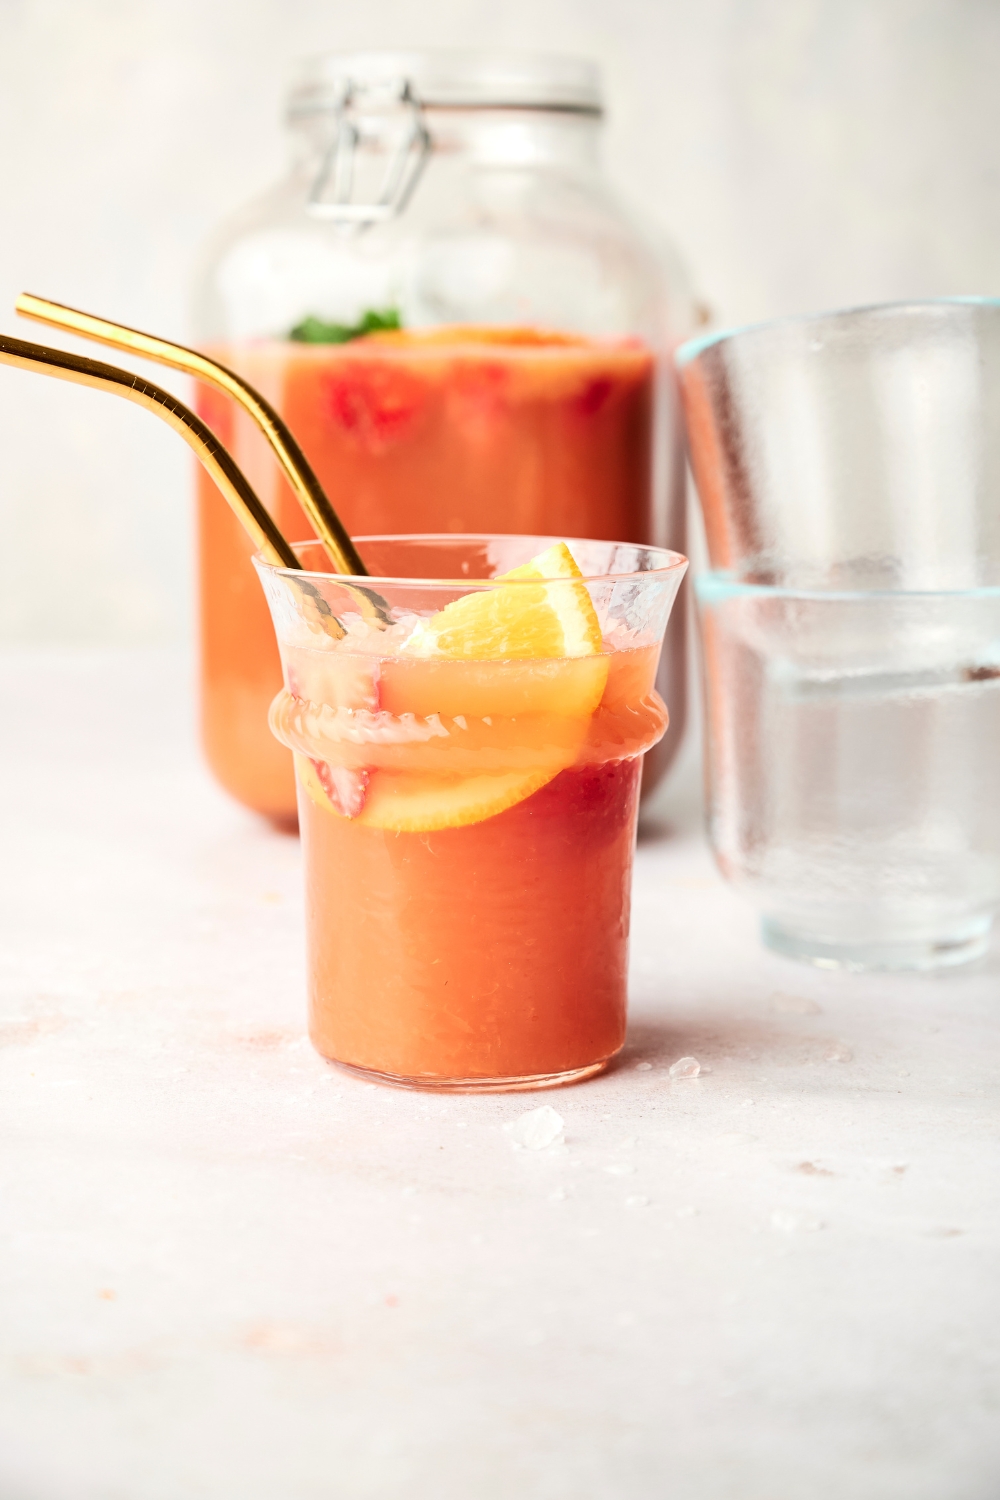 A small glass of jungle juice sits on a counter. There are two golden straws in the glass as well as orange slices.